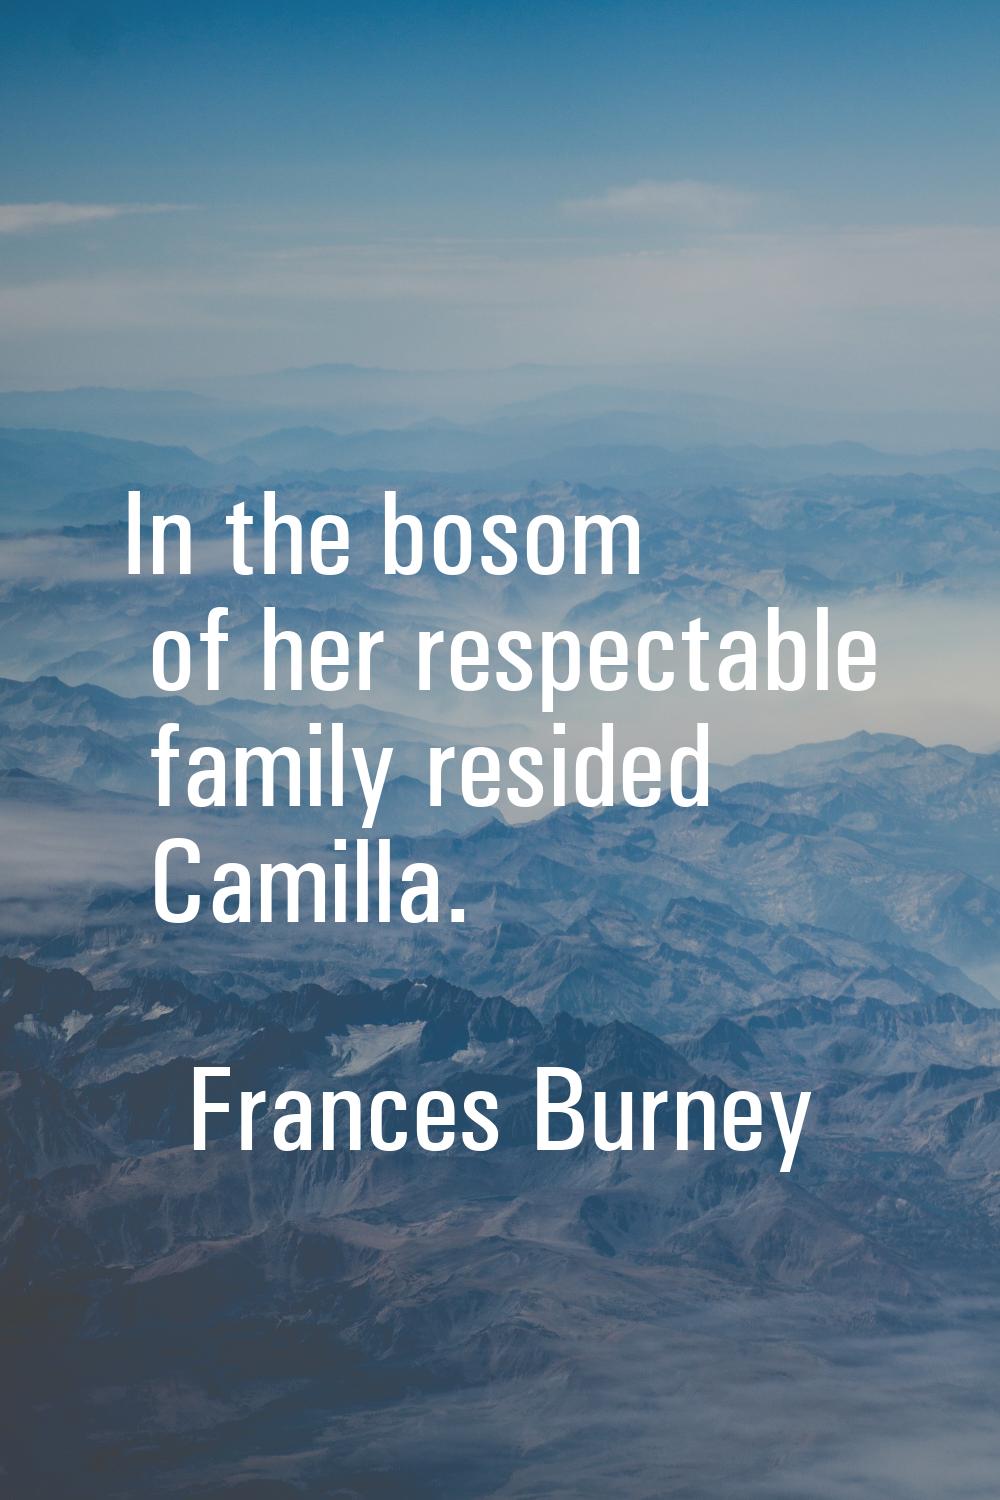 In the bosom of her respectable family resided Camilla.